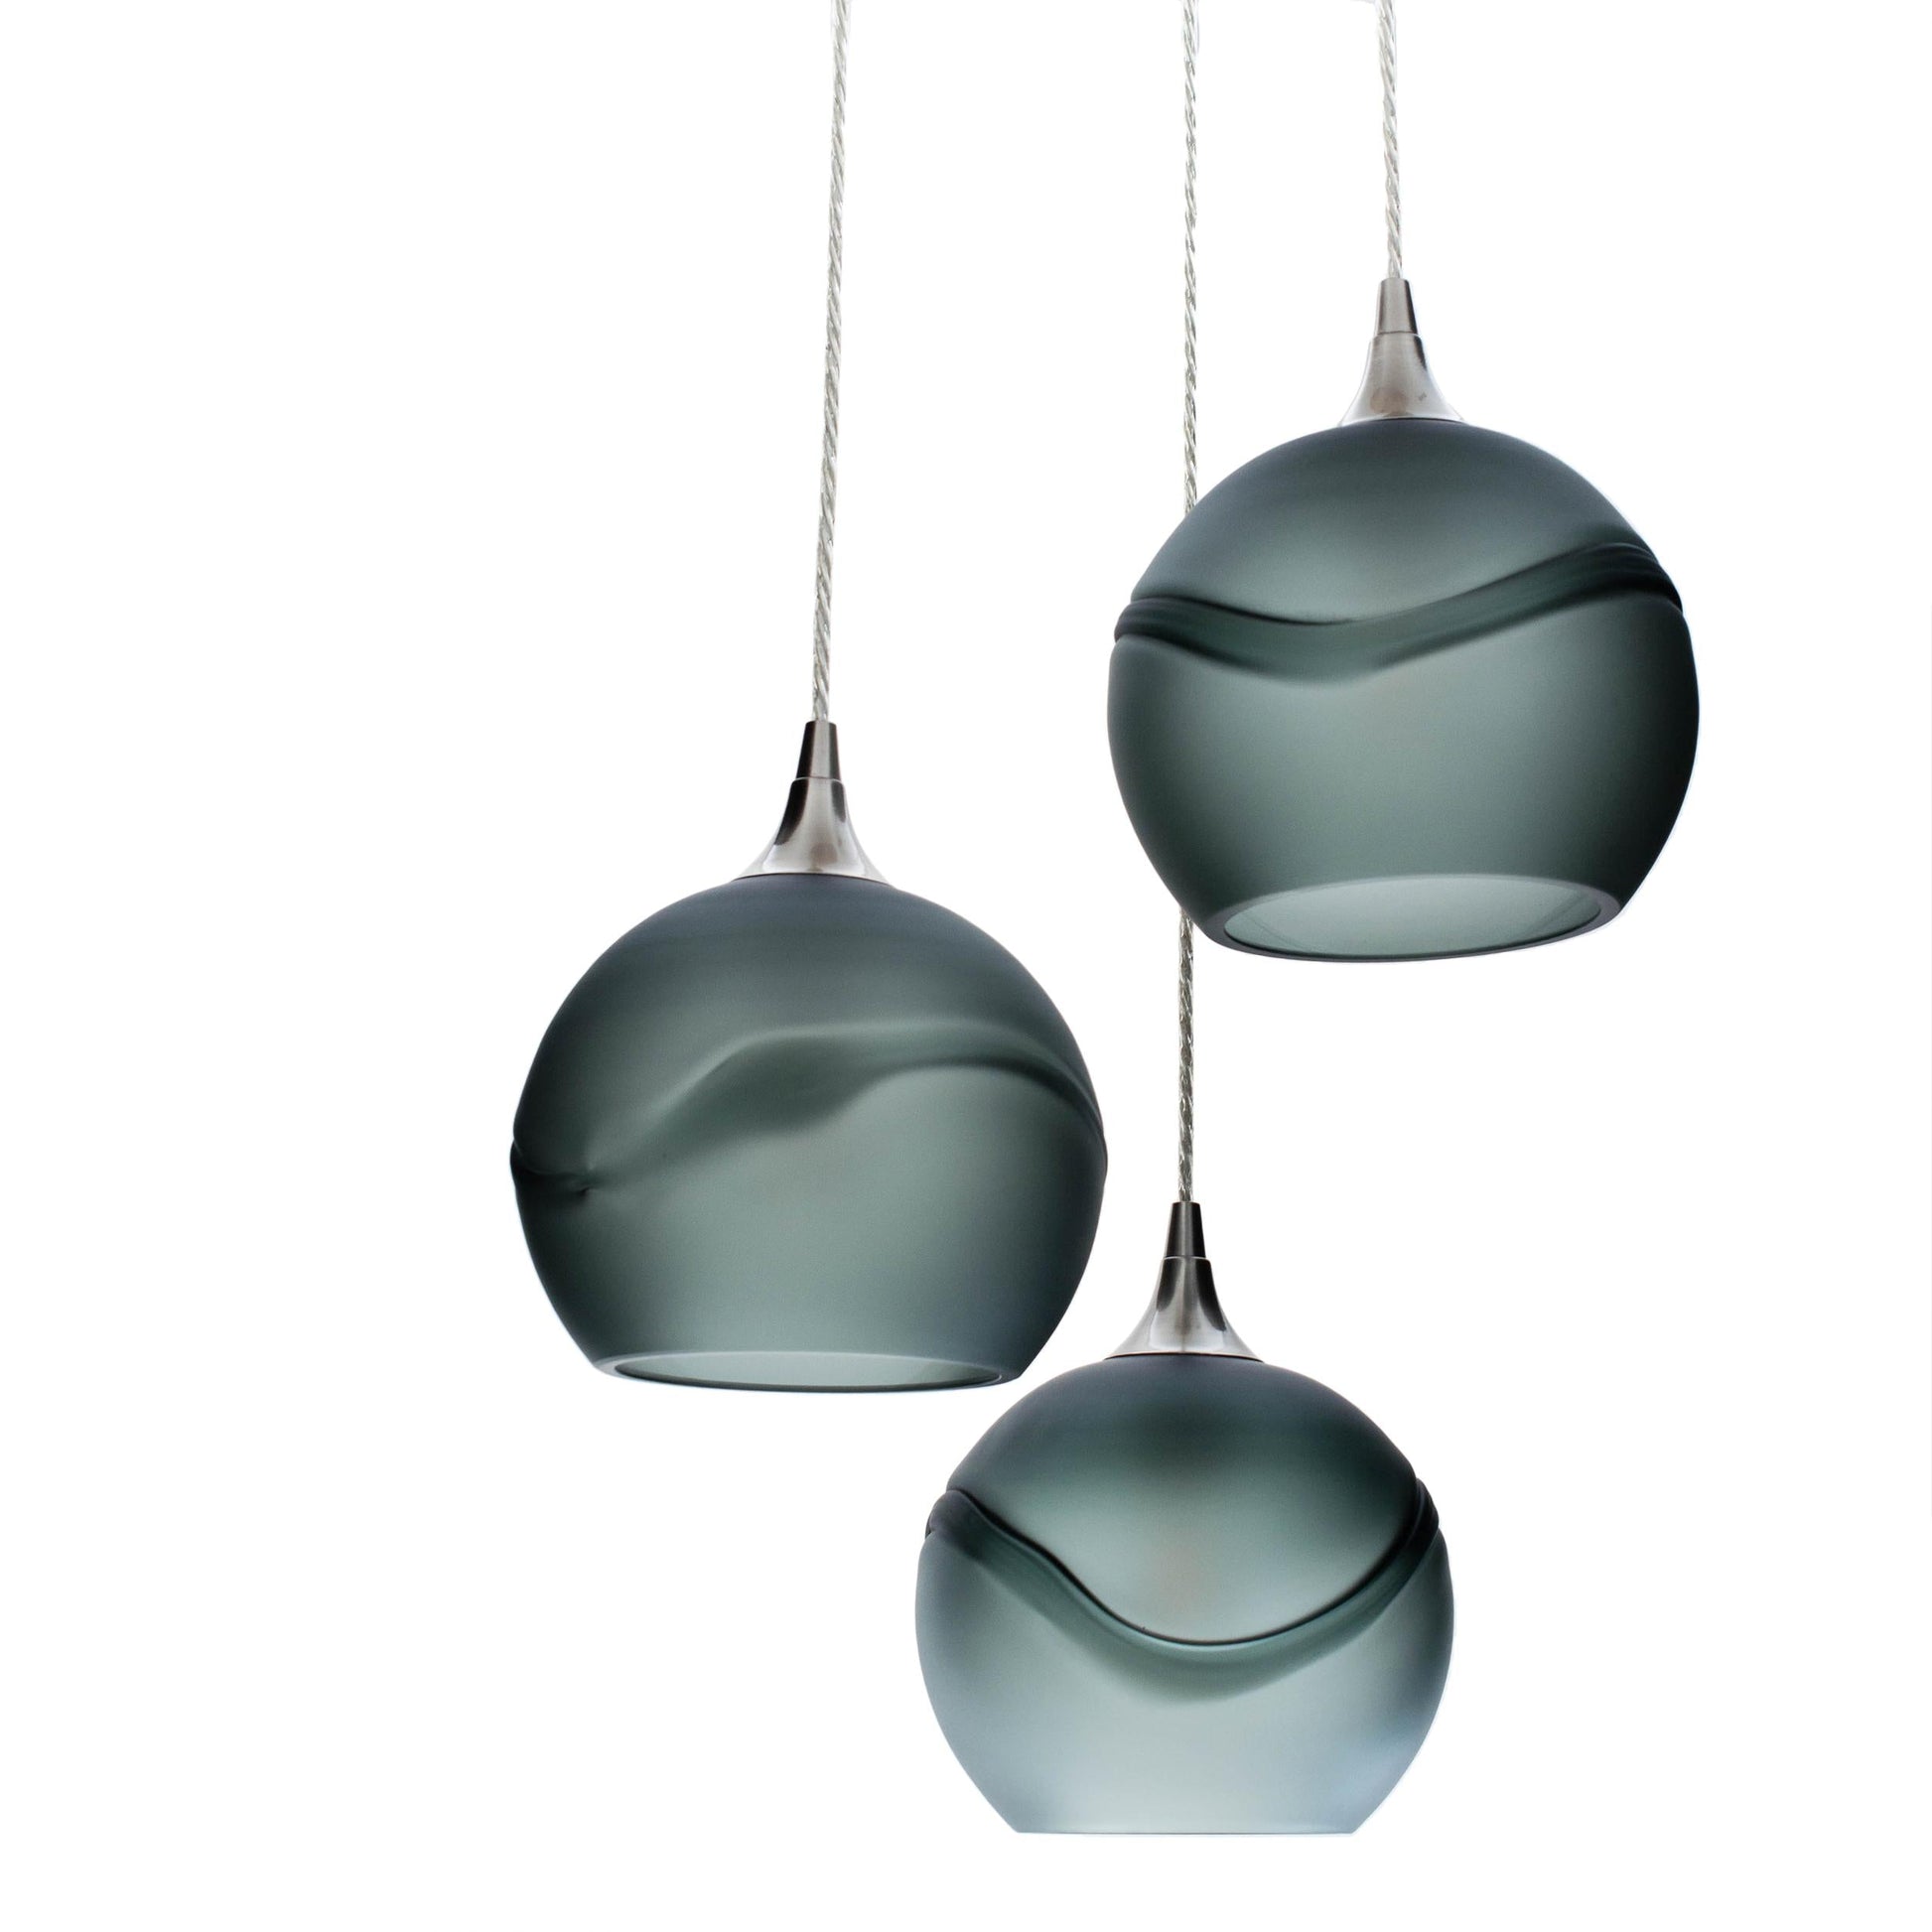 Bicycle Glass Co 767 Glacial: 3 Pendant Cascade Chandelier, Slate Gray Glass, Brushed Nickel Hardware, Light Bulbs Off, Detail Shot, Close Up